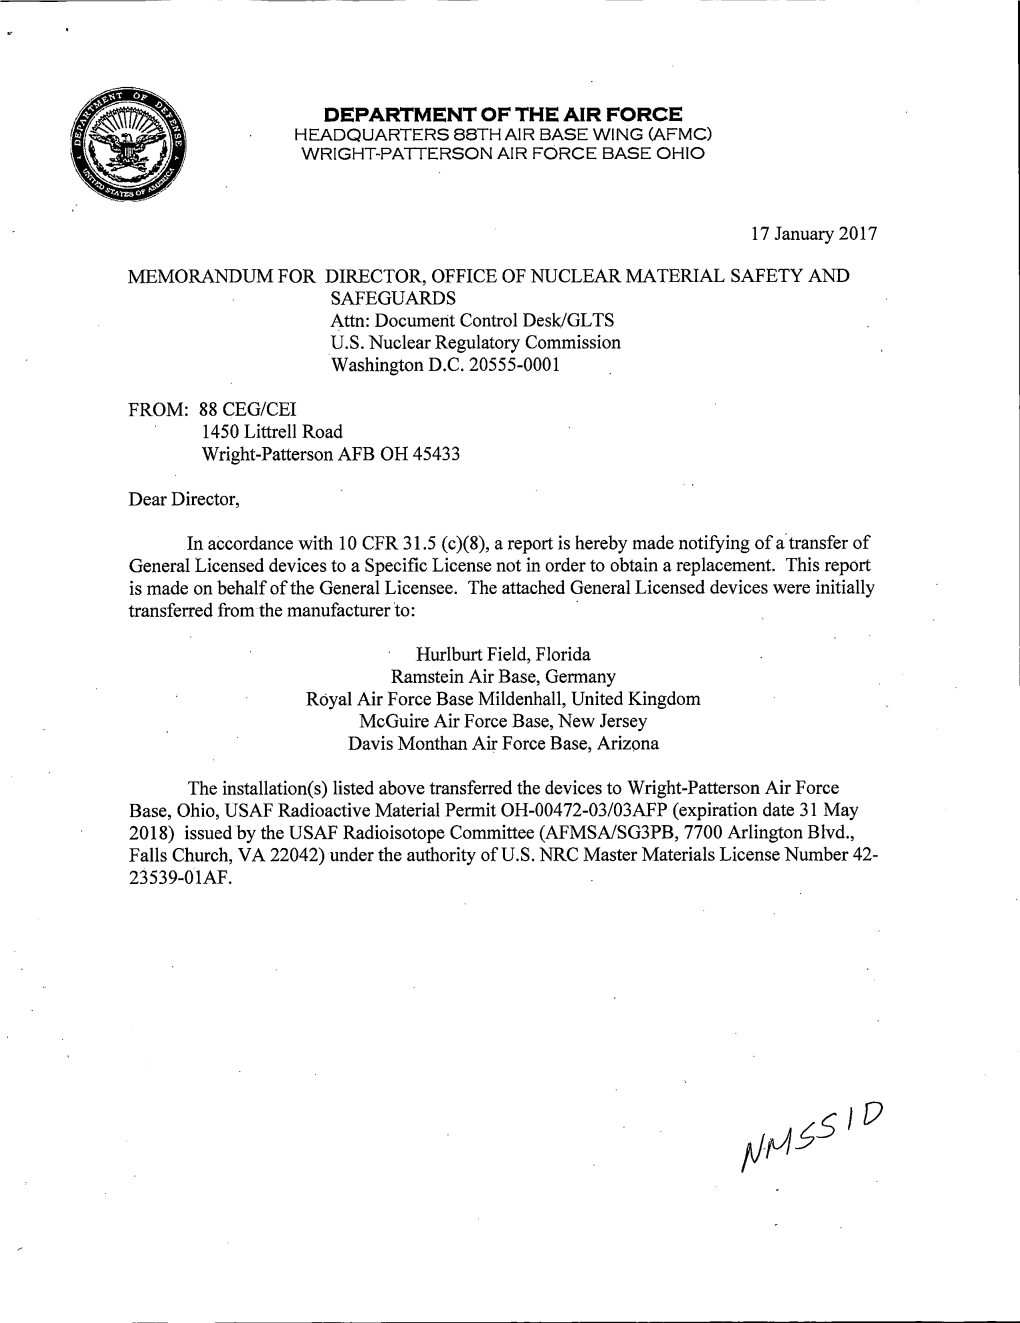 GL Report from US Dept. of the Air Force